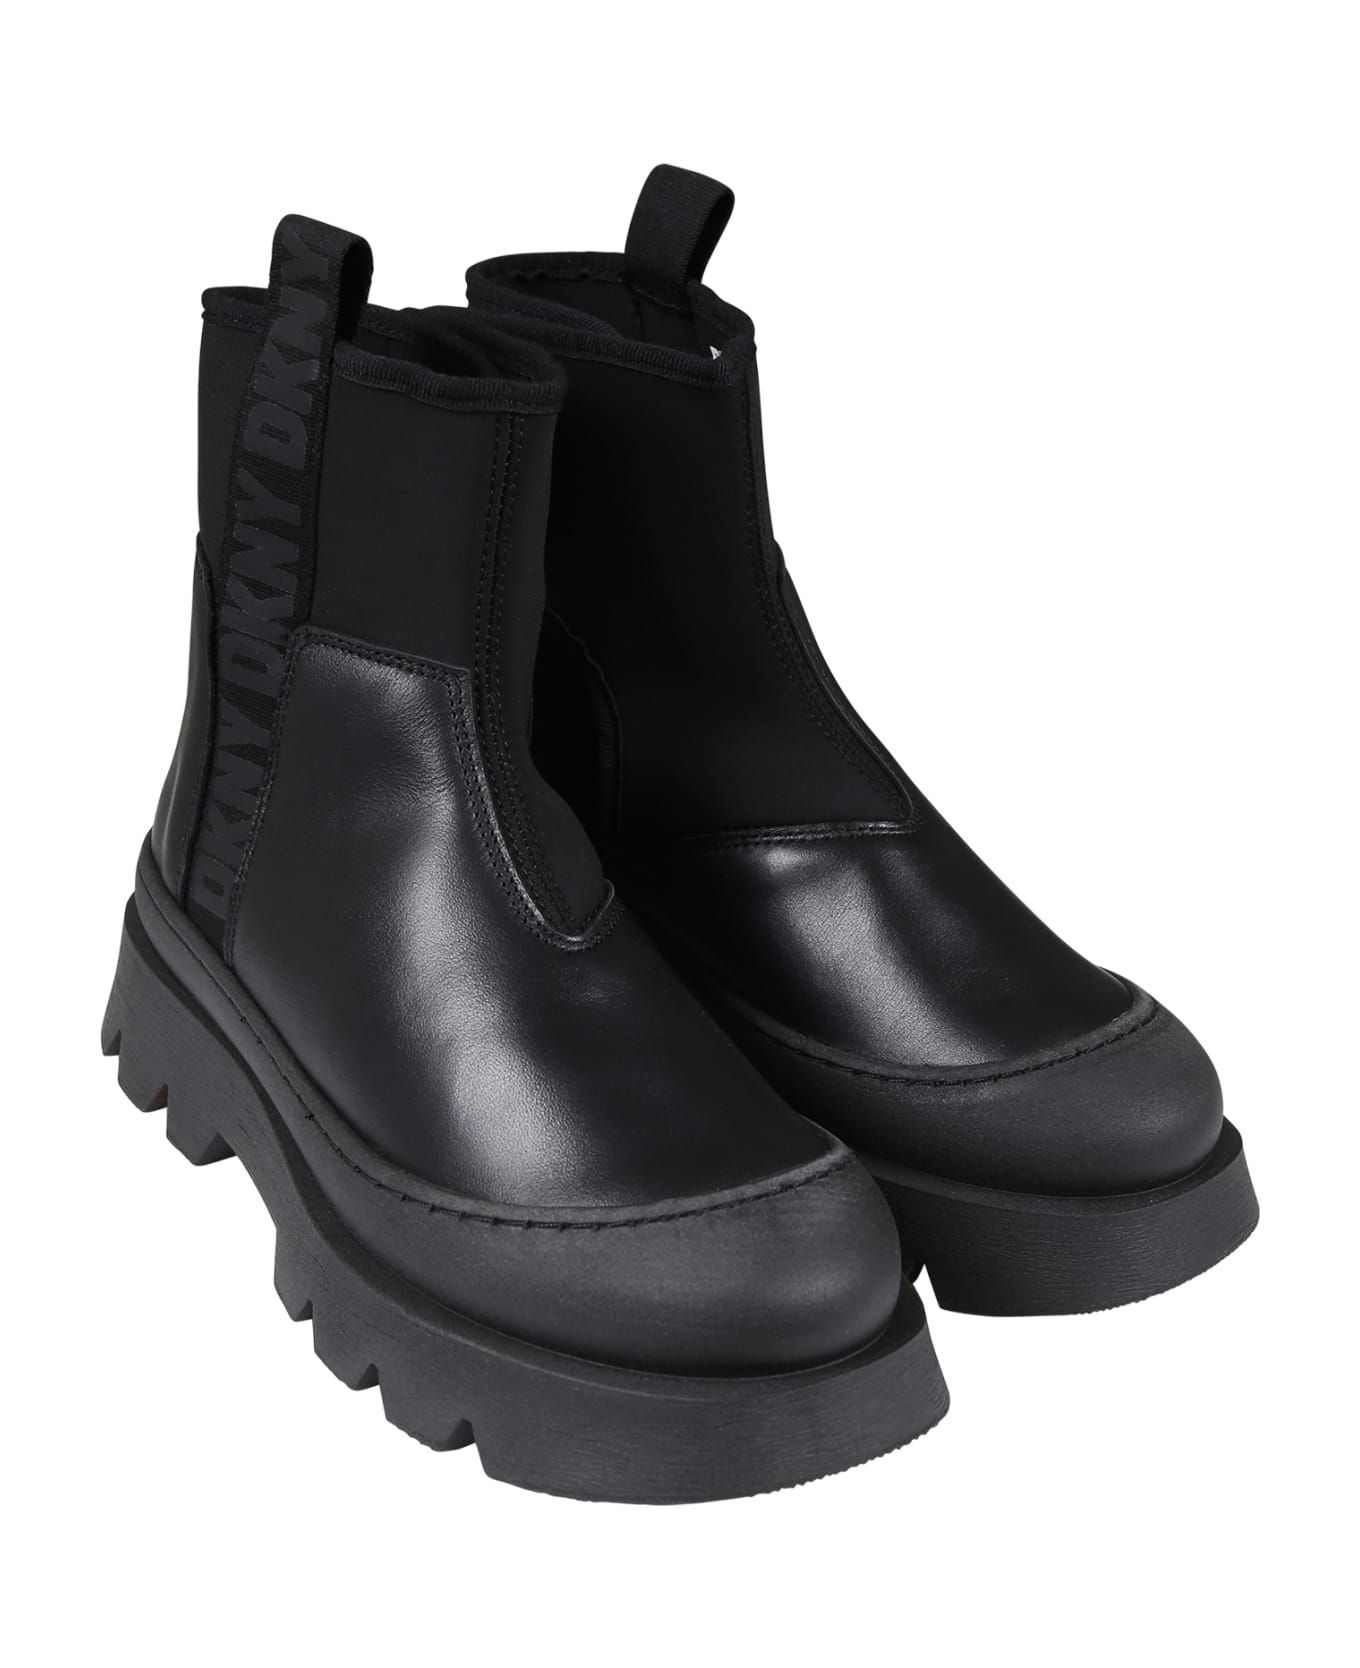 DKNY Black Ankle Boots For Girl With Logo - Black